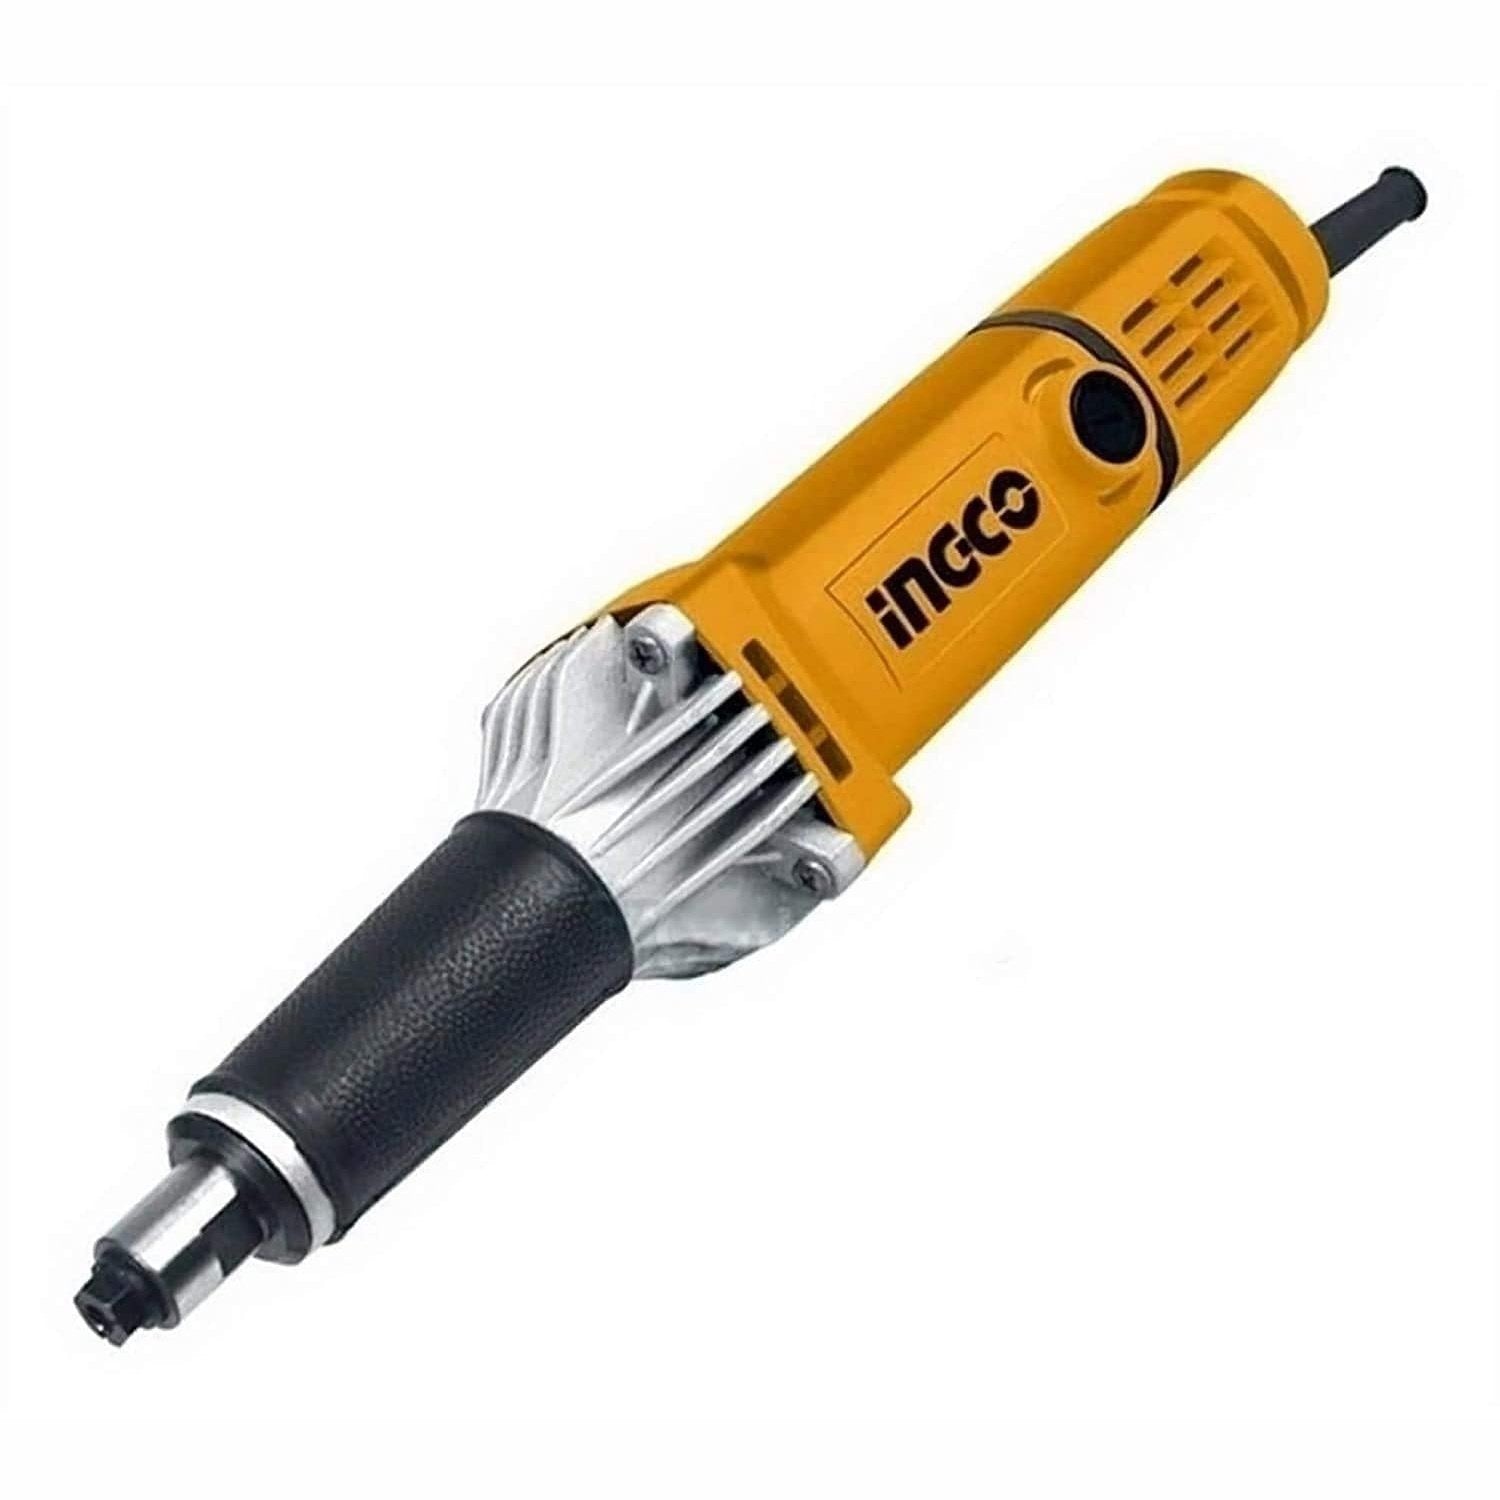 Ingco Die Grinder 550W - PDG5501 | Supply Master | Accra, Ghana Rotary & Oscillating Tool Buy Tools hardware Building materials